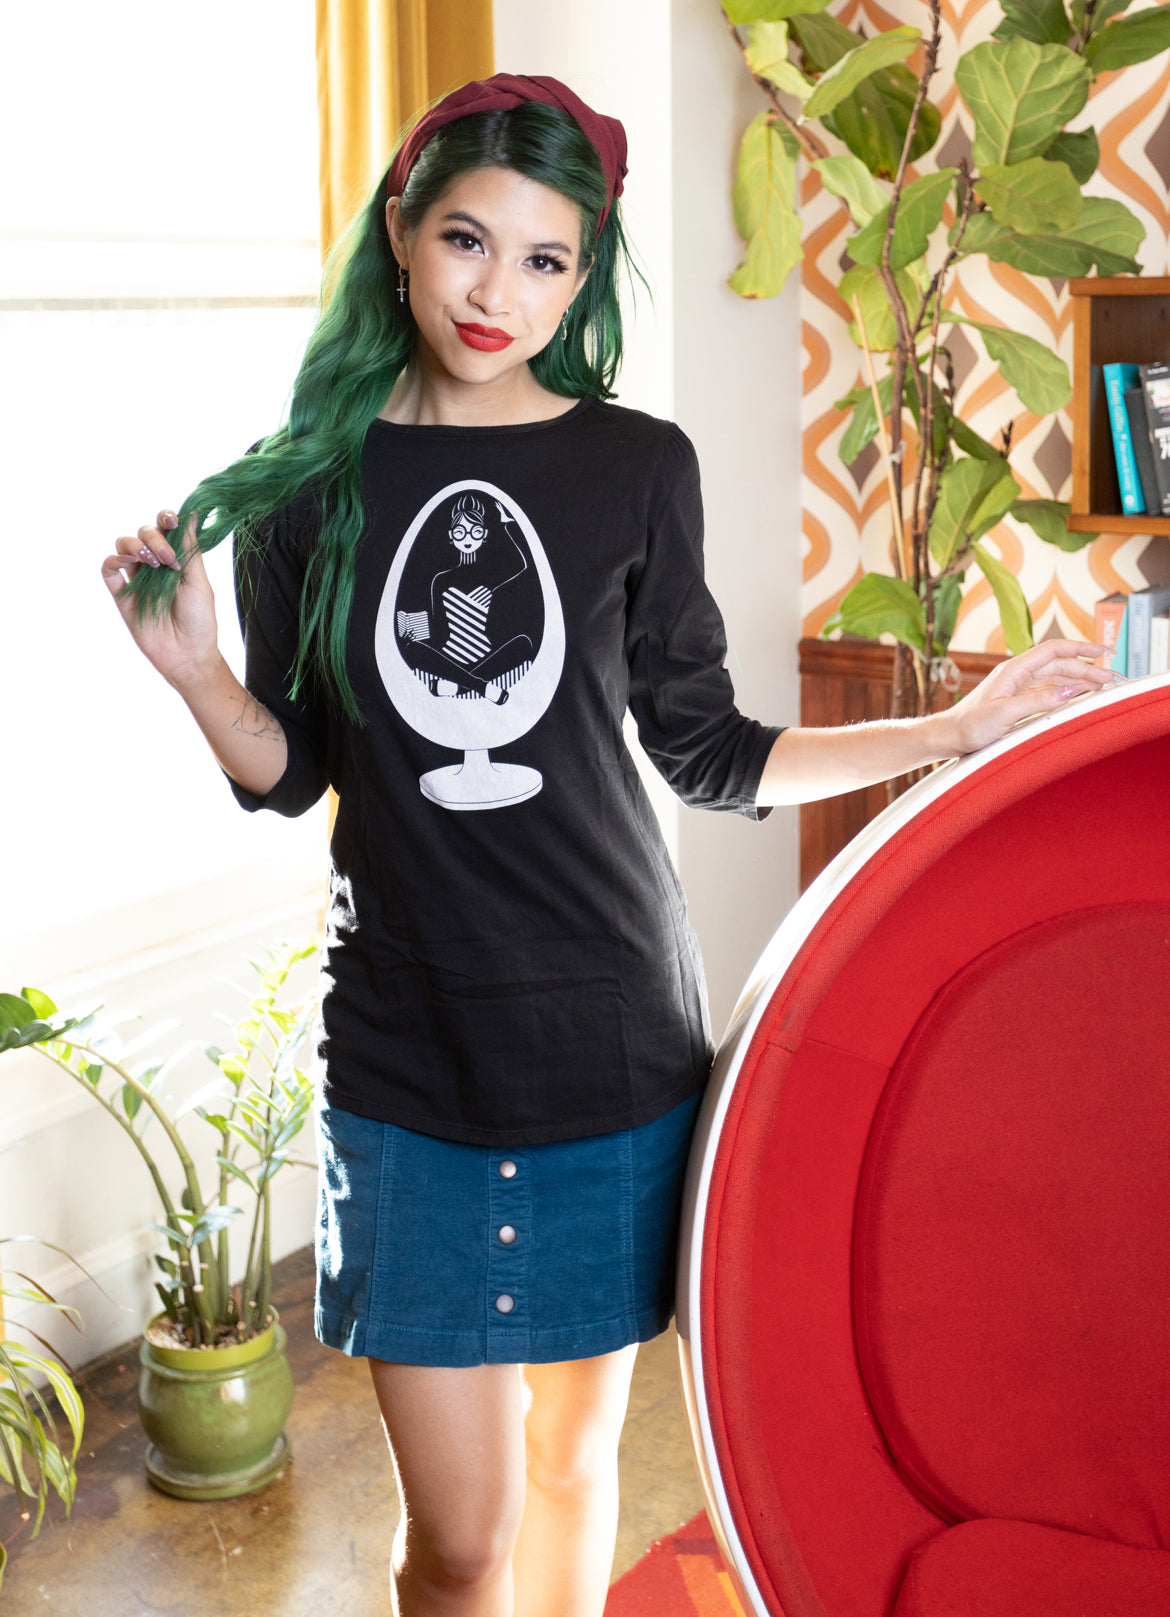 Girl with green hair standing next to ball chair and wearing black 3/4 sleeve tee with a white graphic of a girl reading in an egg chair